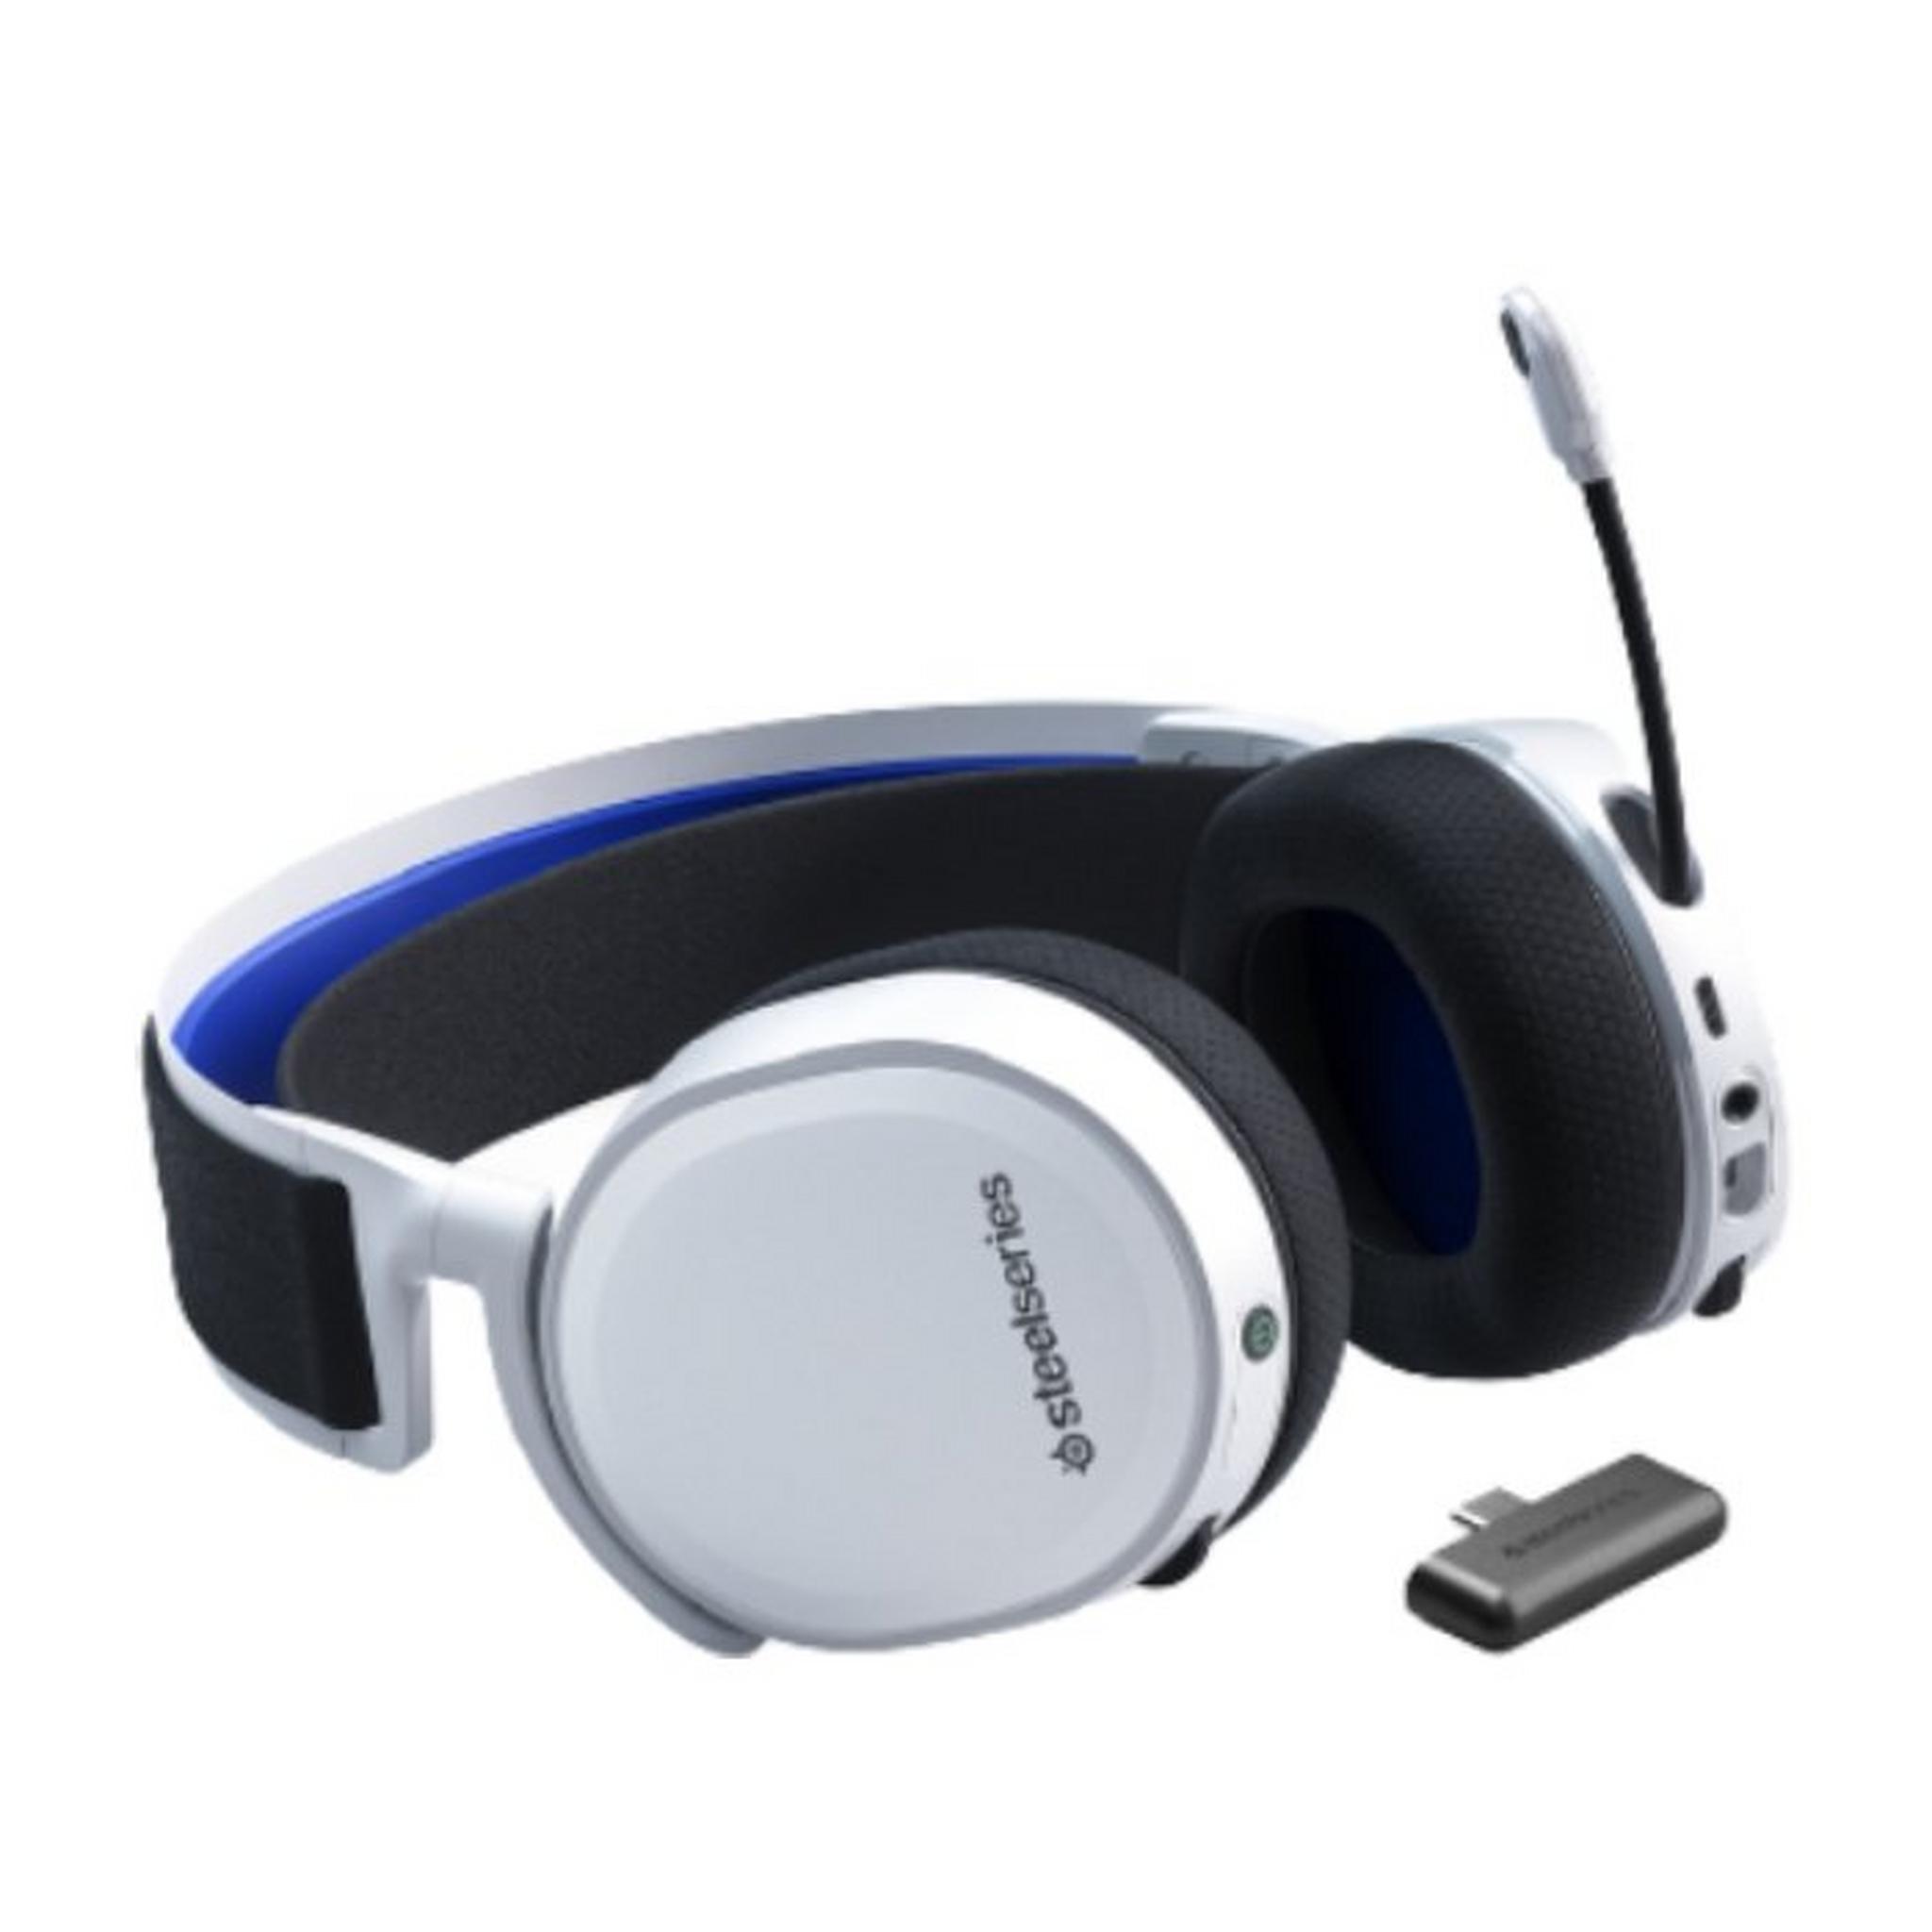 SteelSeries Arctis 7P Wireless PlayStation Gaming Headset - White